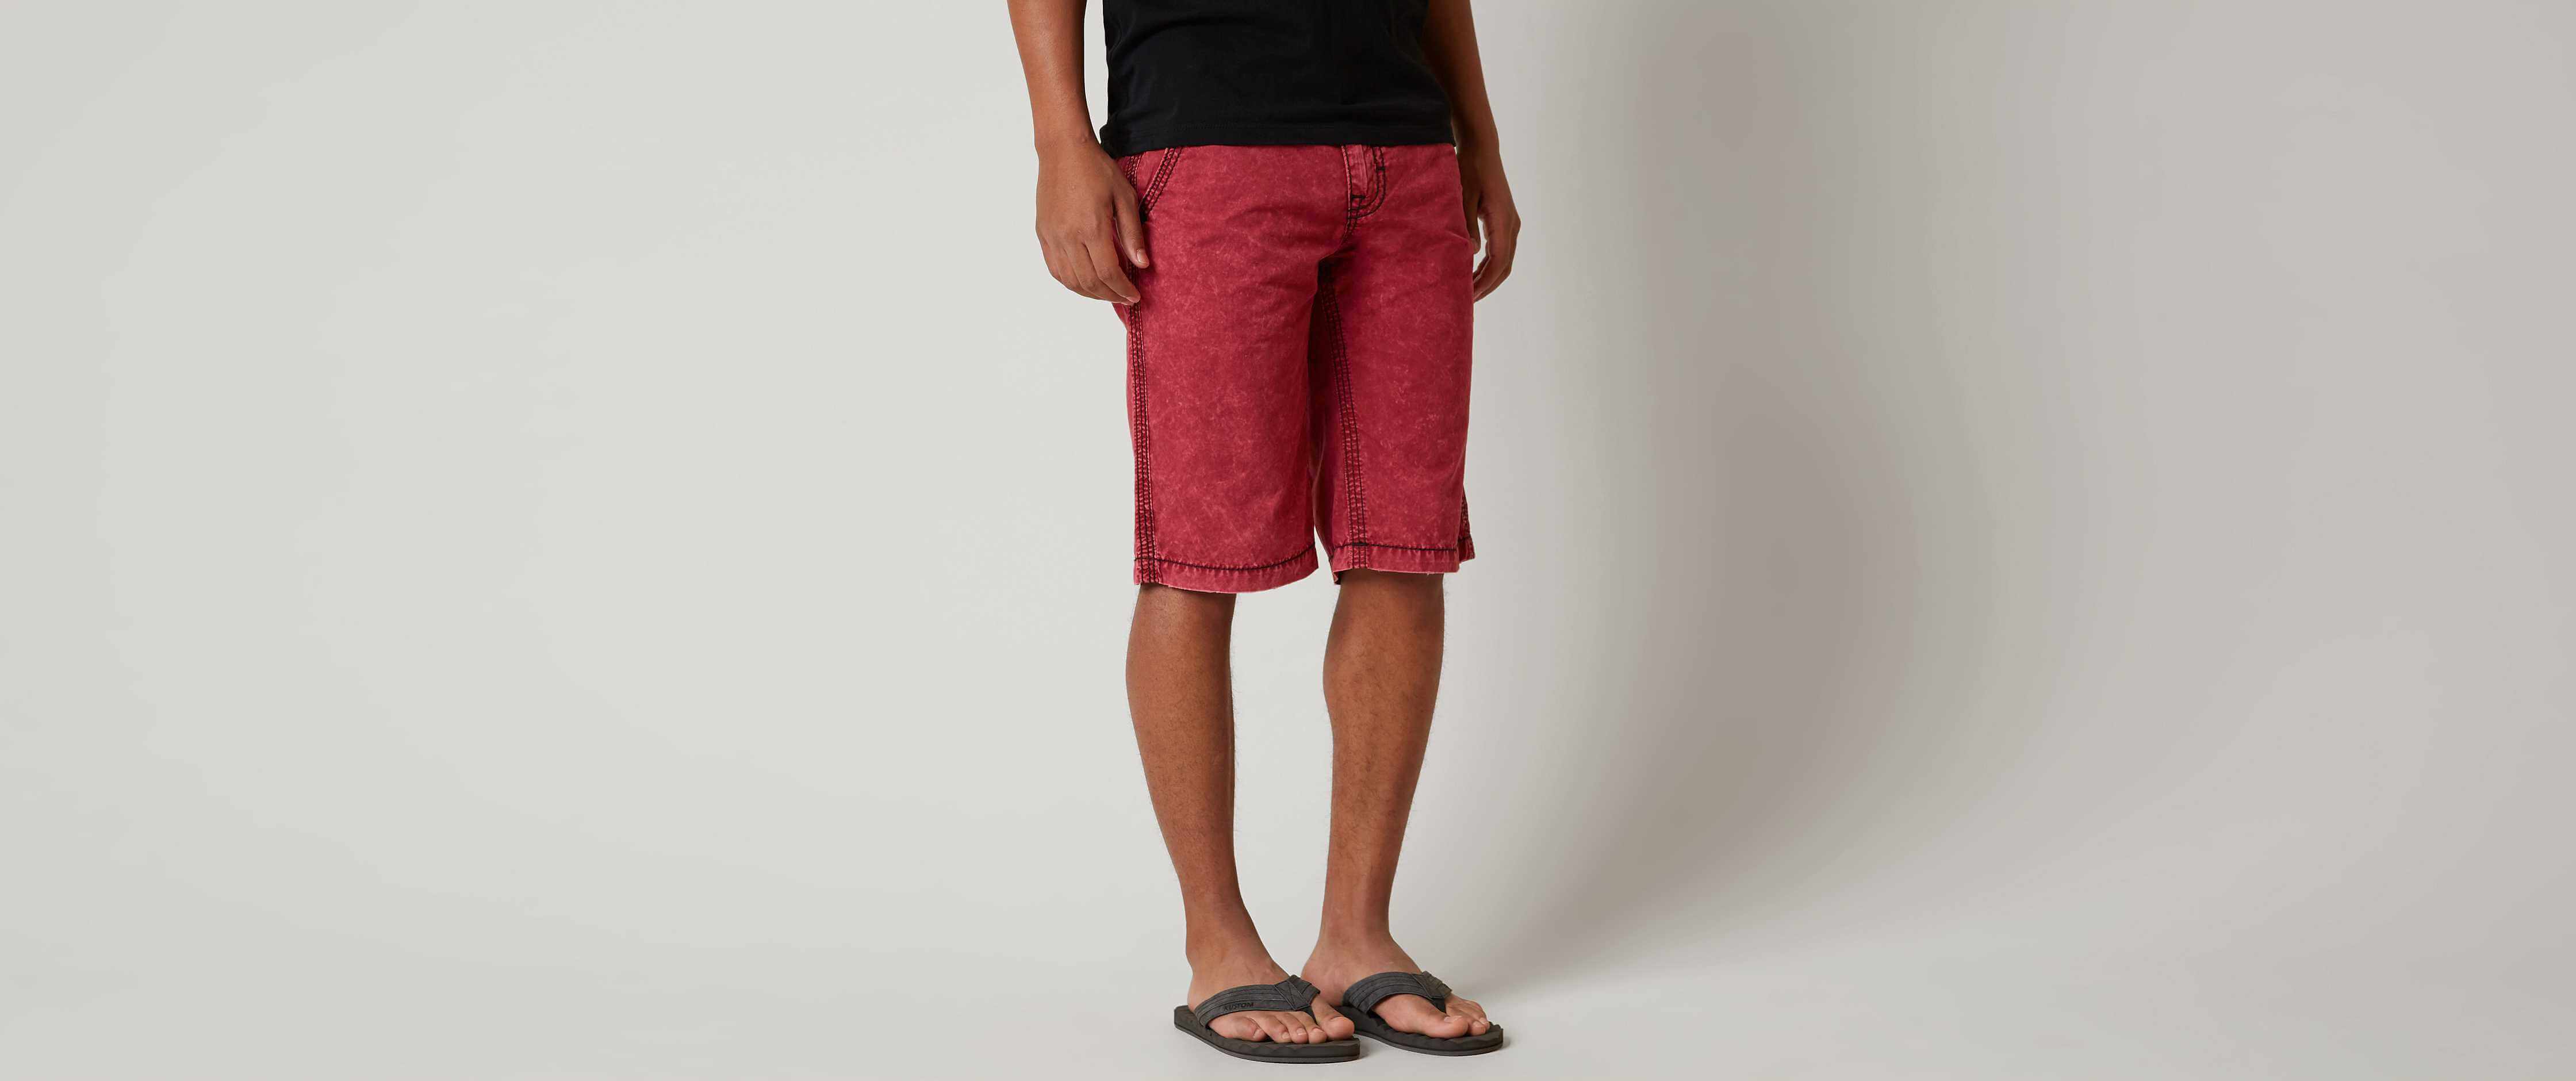 red rock revival shorts